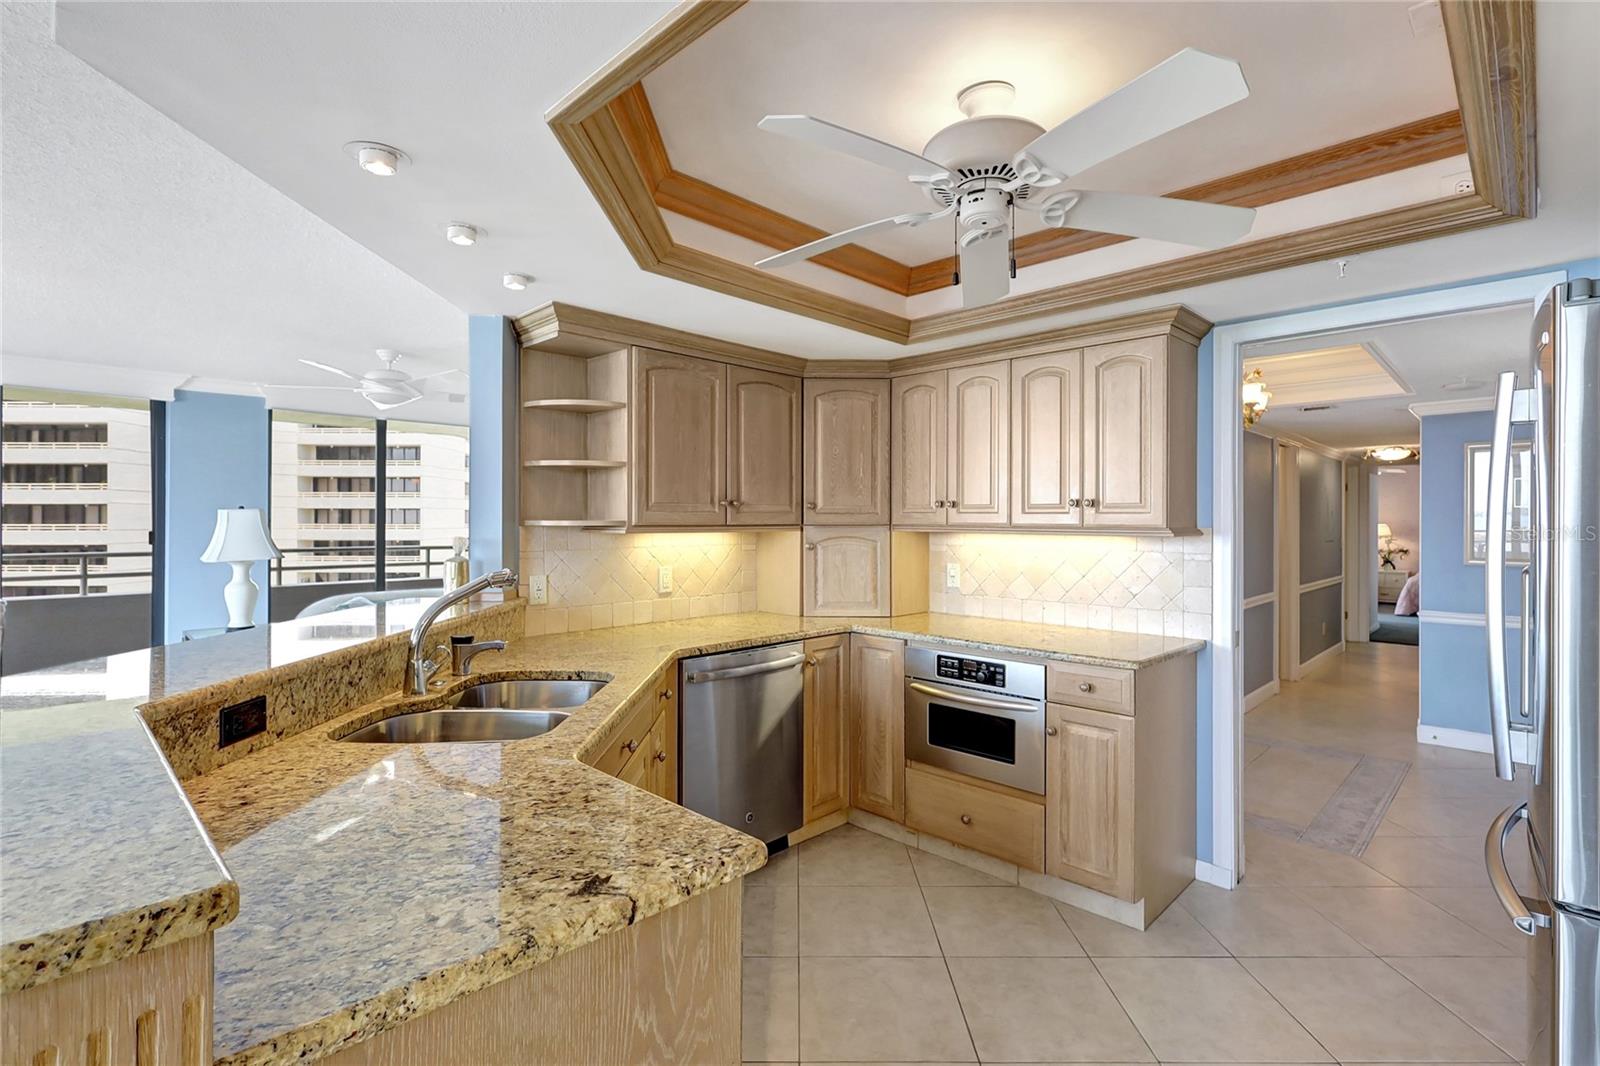 Granite counters, wood cabinetry, appliance garage, built-in wine rack, deluxe coffered ceiling